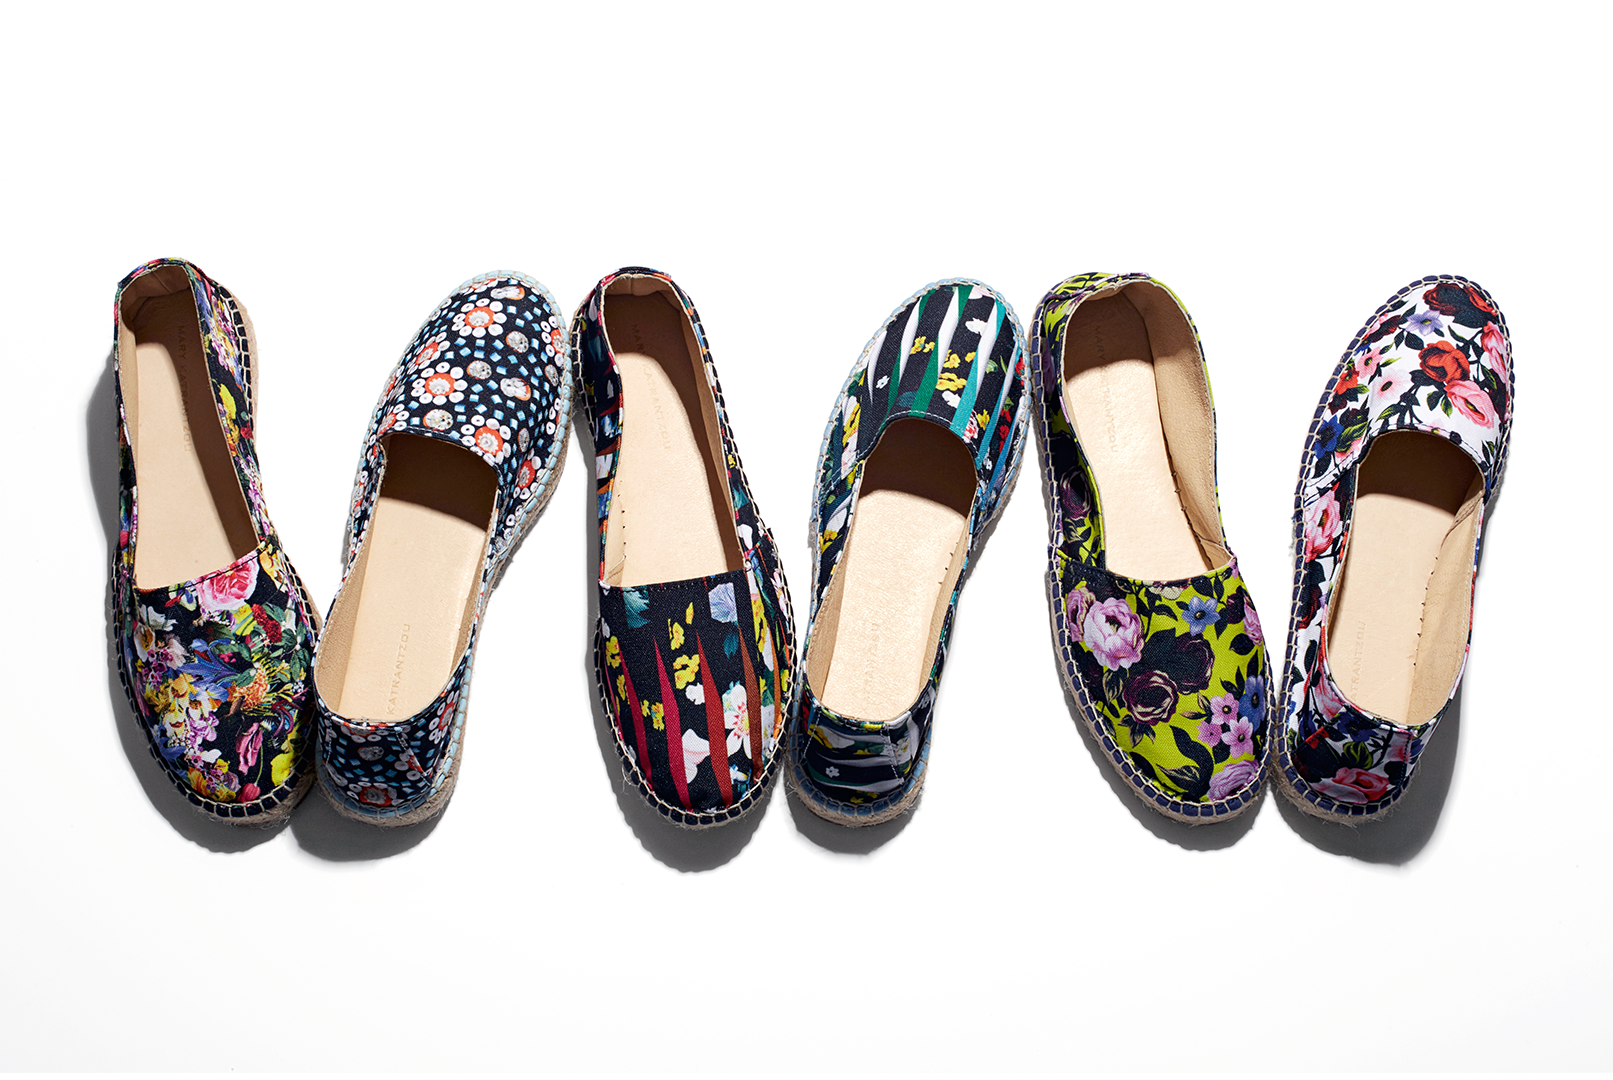 Exclusive: Level Shoe District To Release Esapdrille Collection With ...